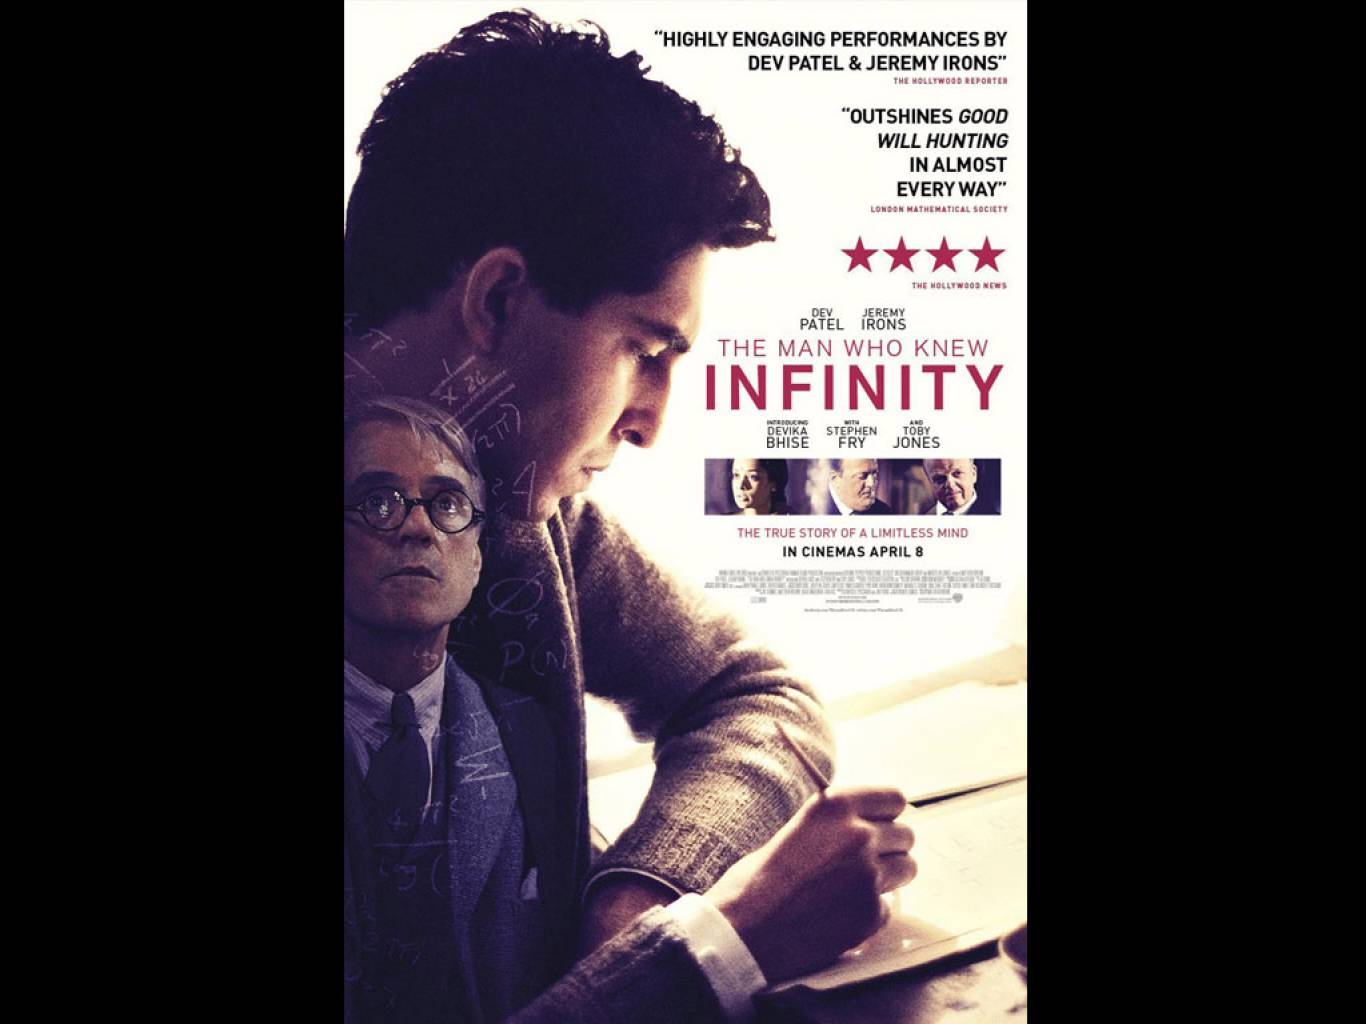 The Man Who Knew Infinity Movie HD Wallpaper. The Man Who Knew Infinity HD Movie Wallpaper Free Download (1080p to 2K)